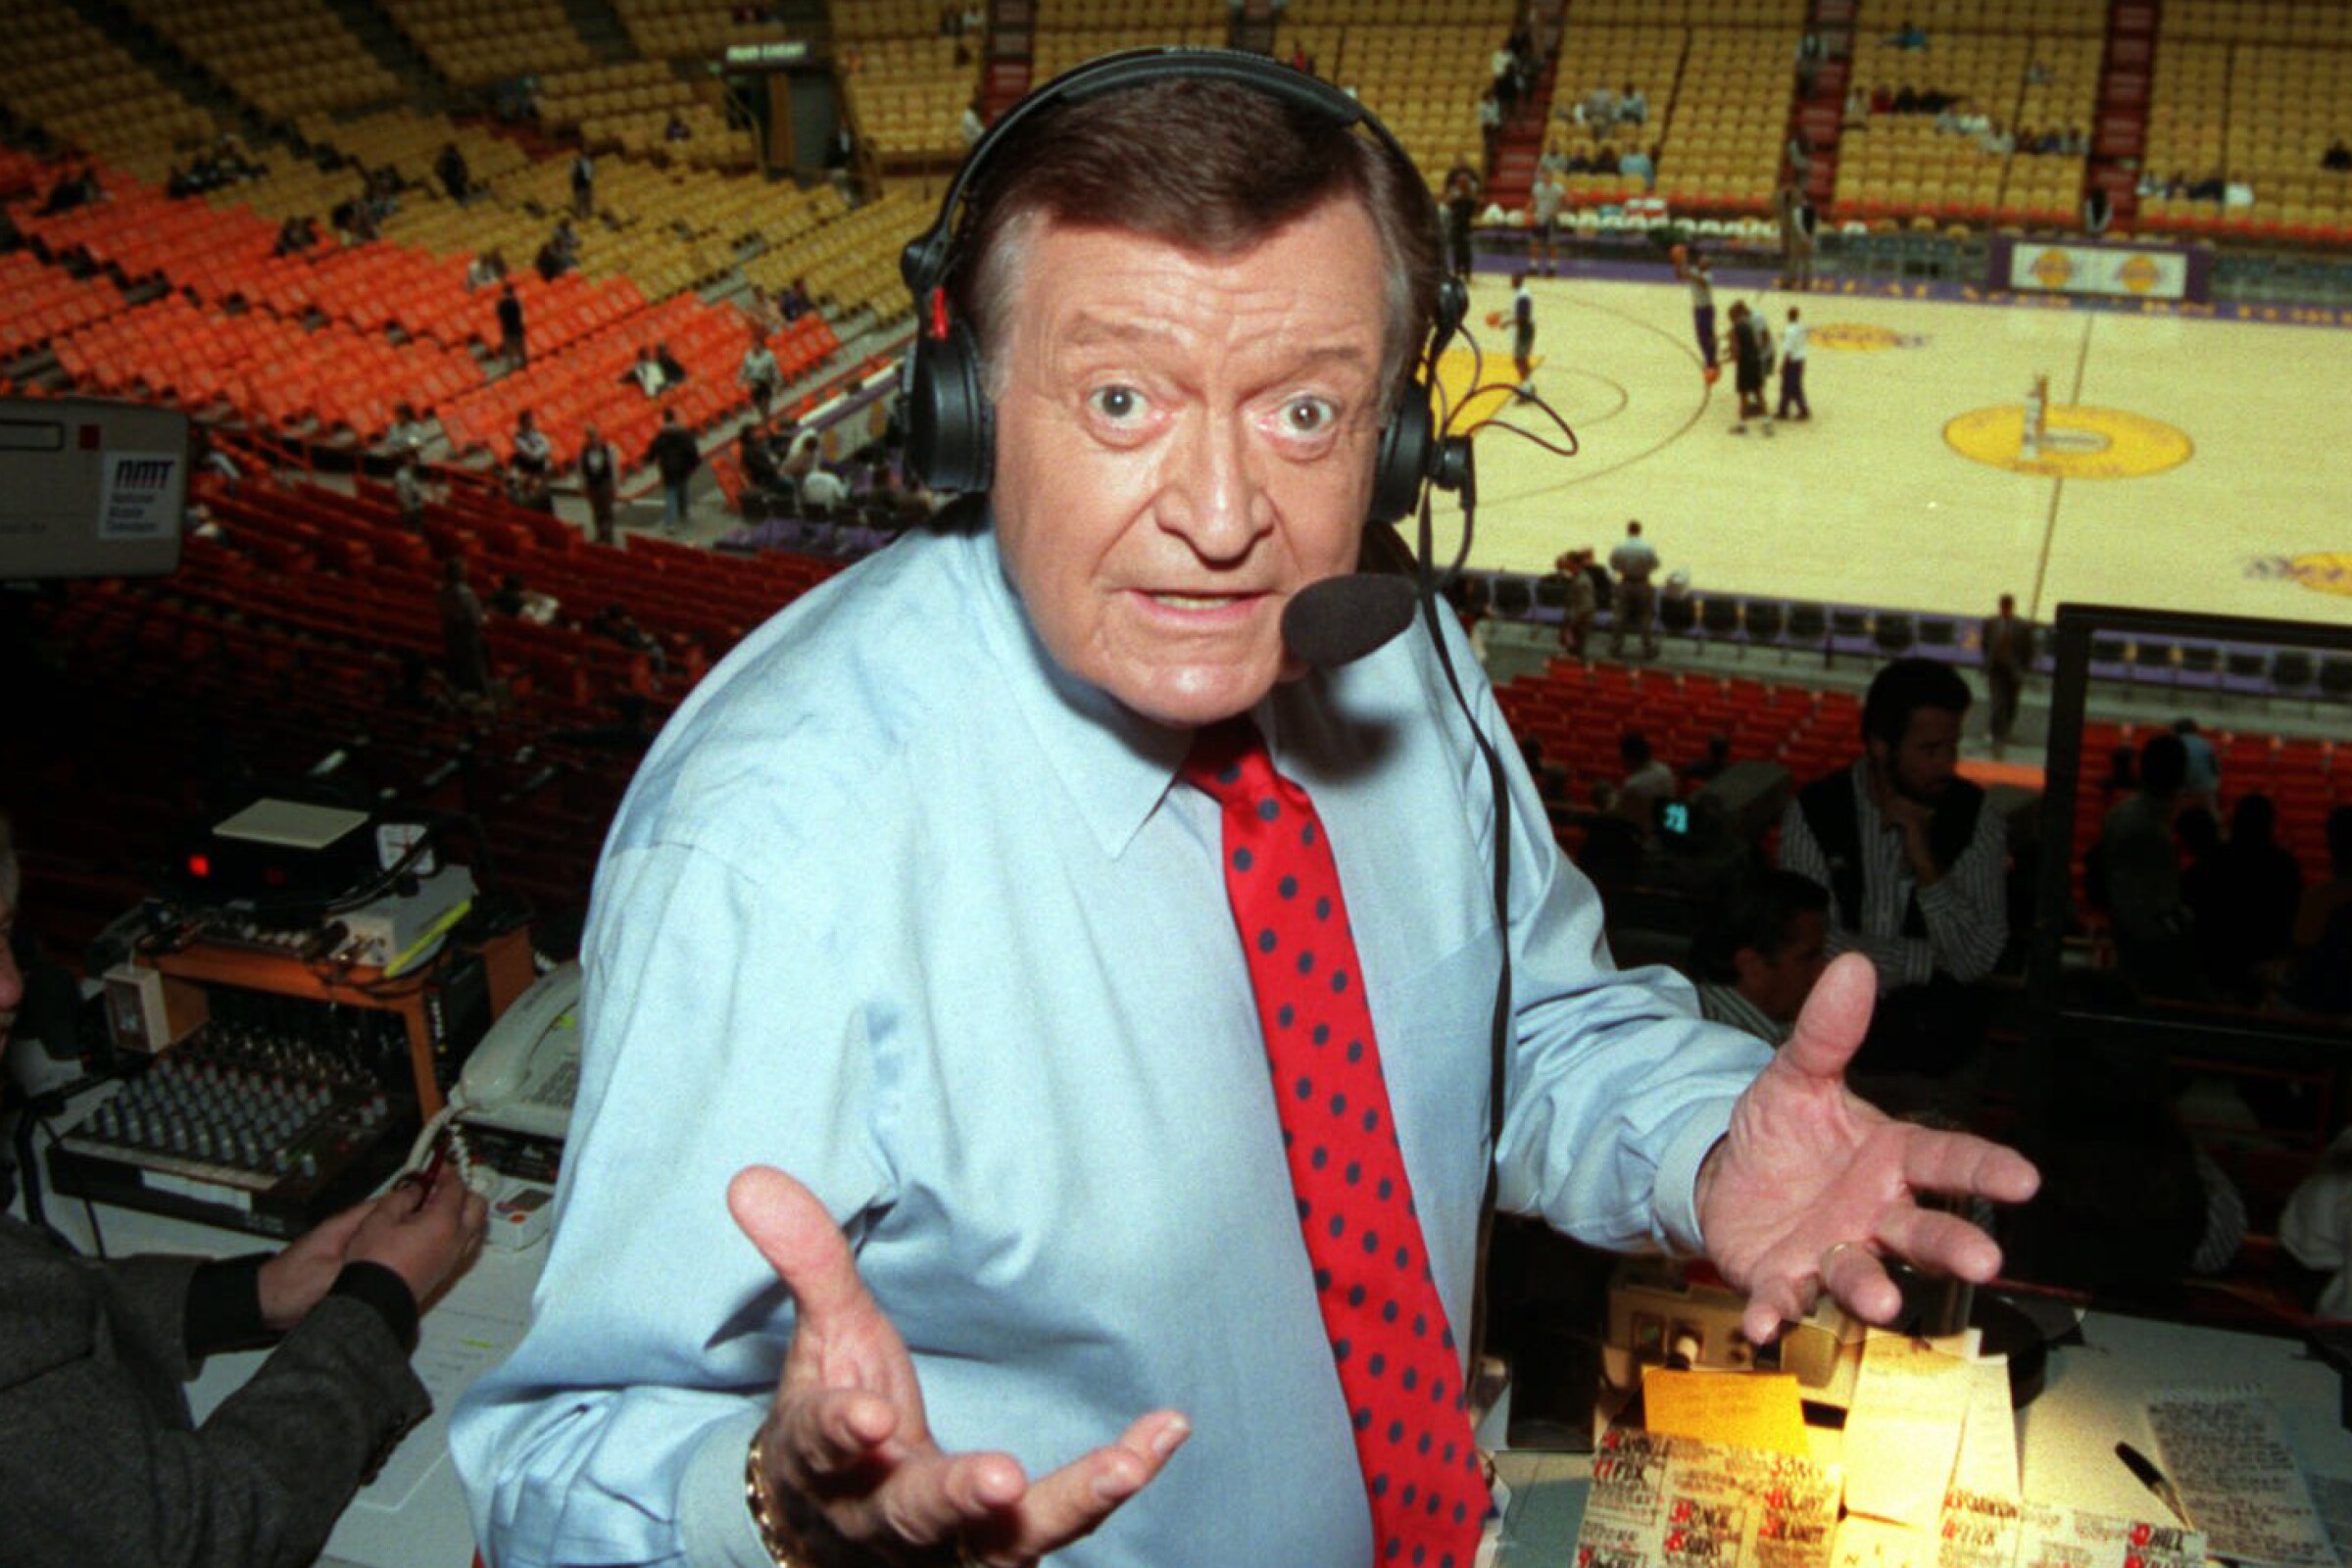 Chick Hearn, Lakers